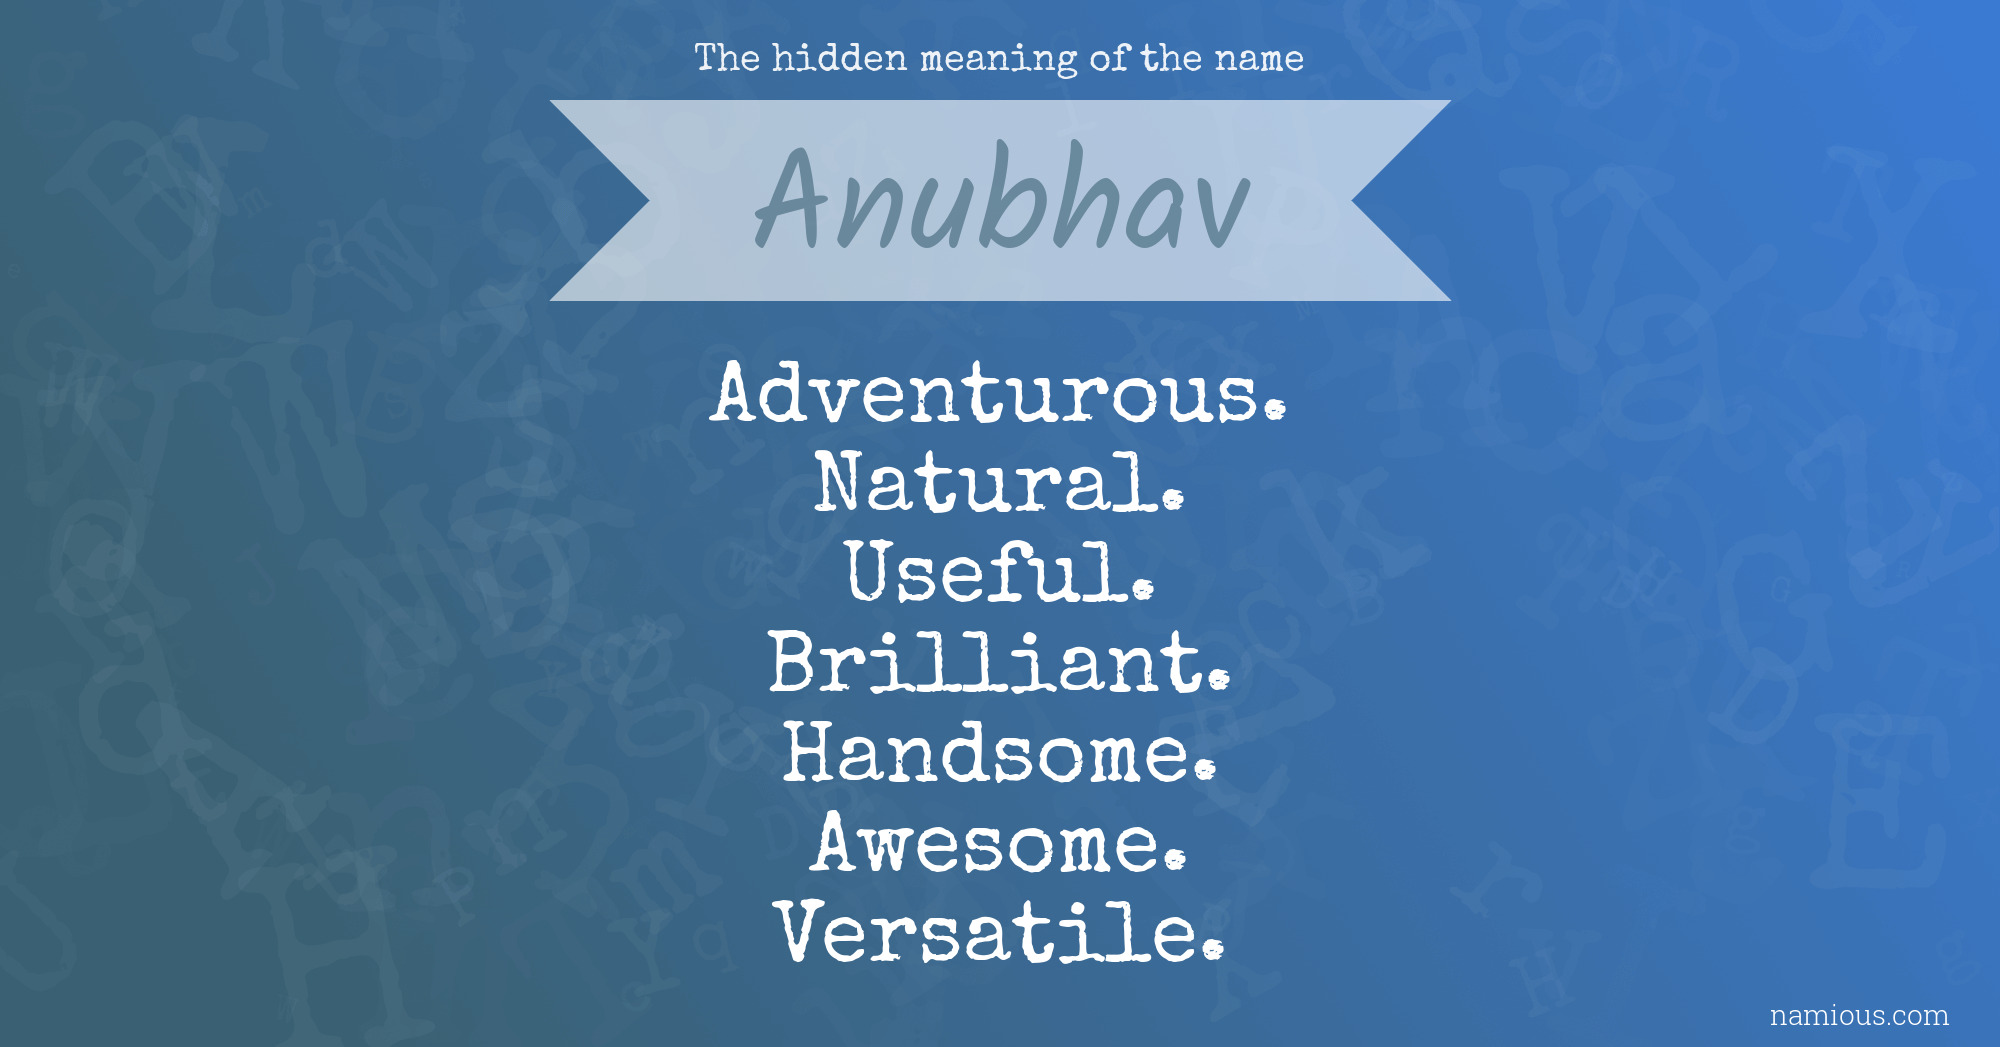 The hidden meaning of the name Anubhav